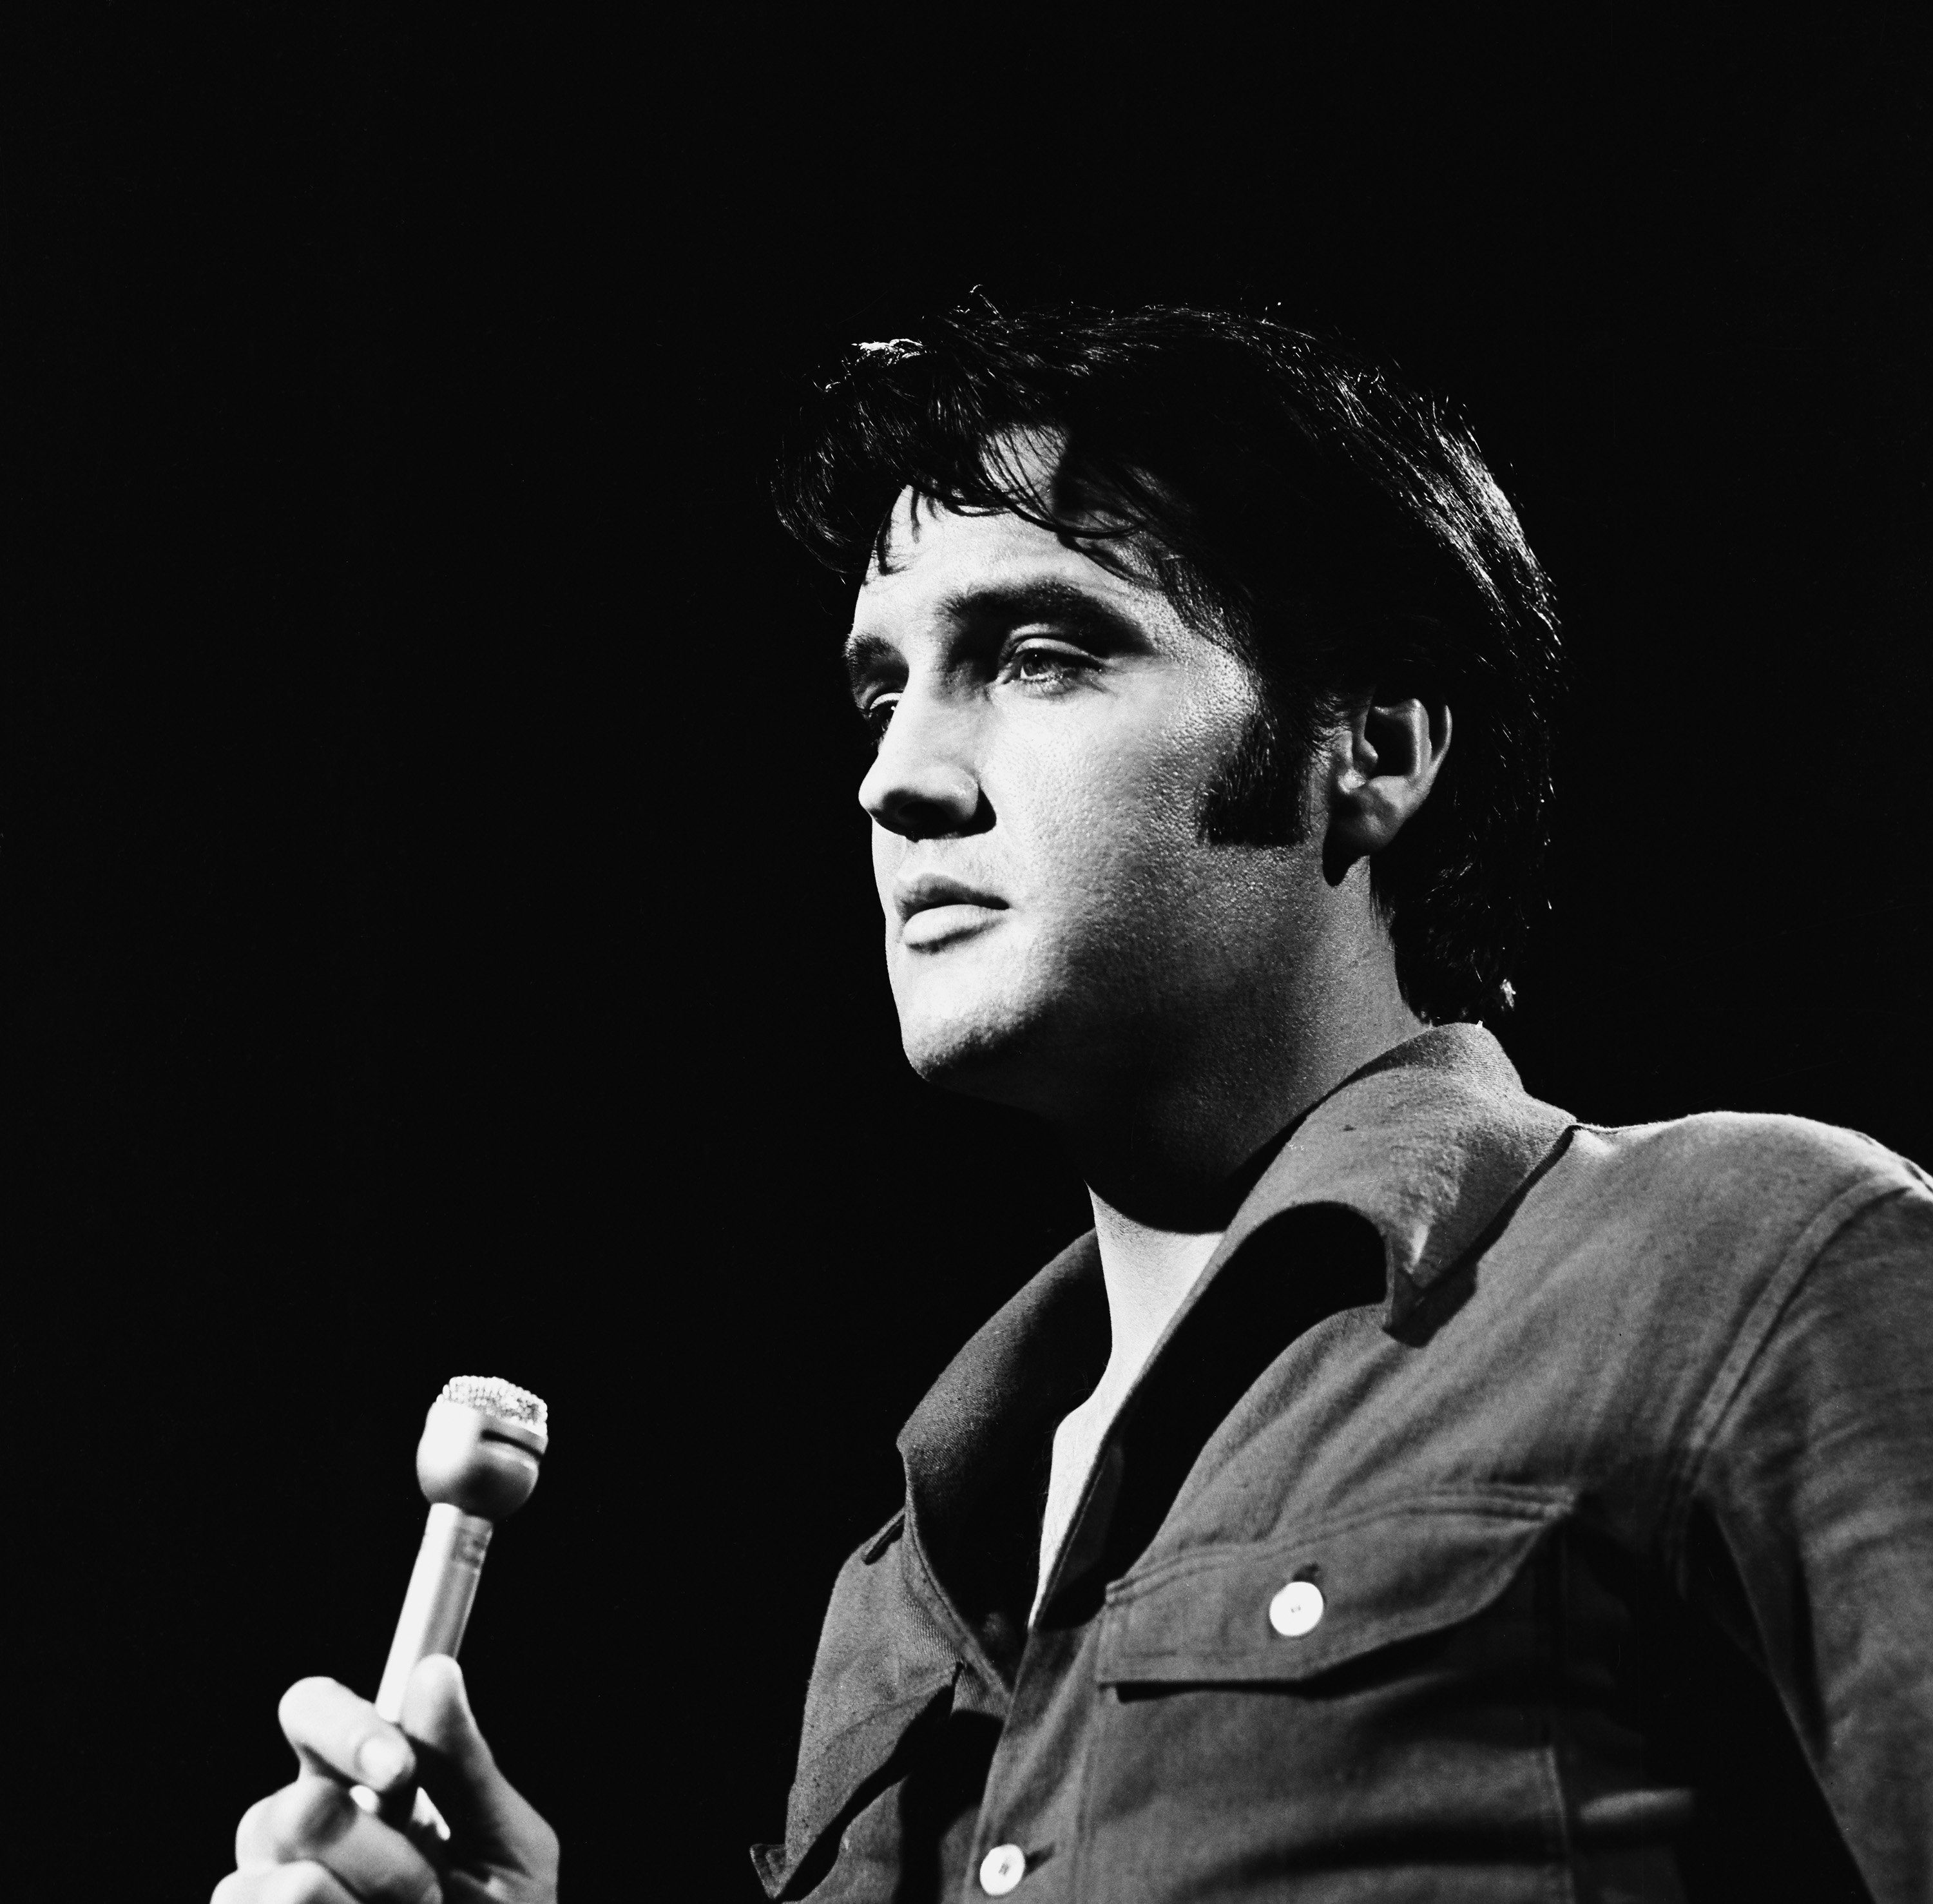 "Can't Help Falling in Love" singer Elvis Presley with a microphone